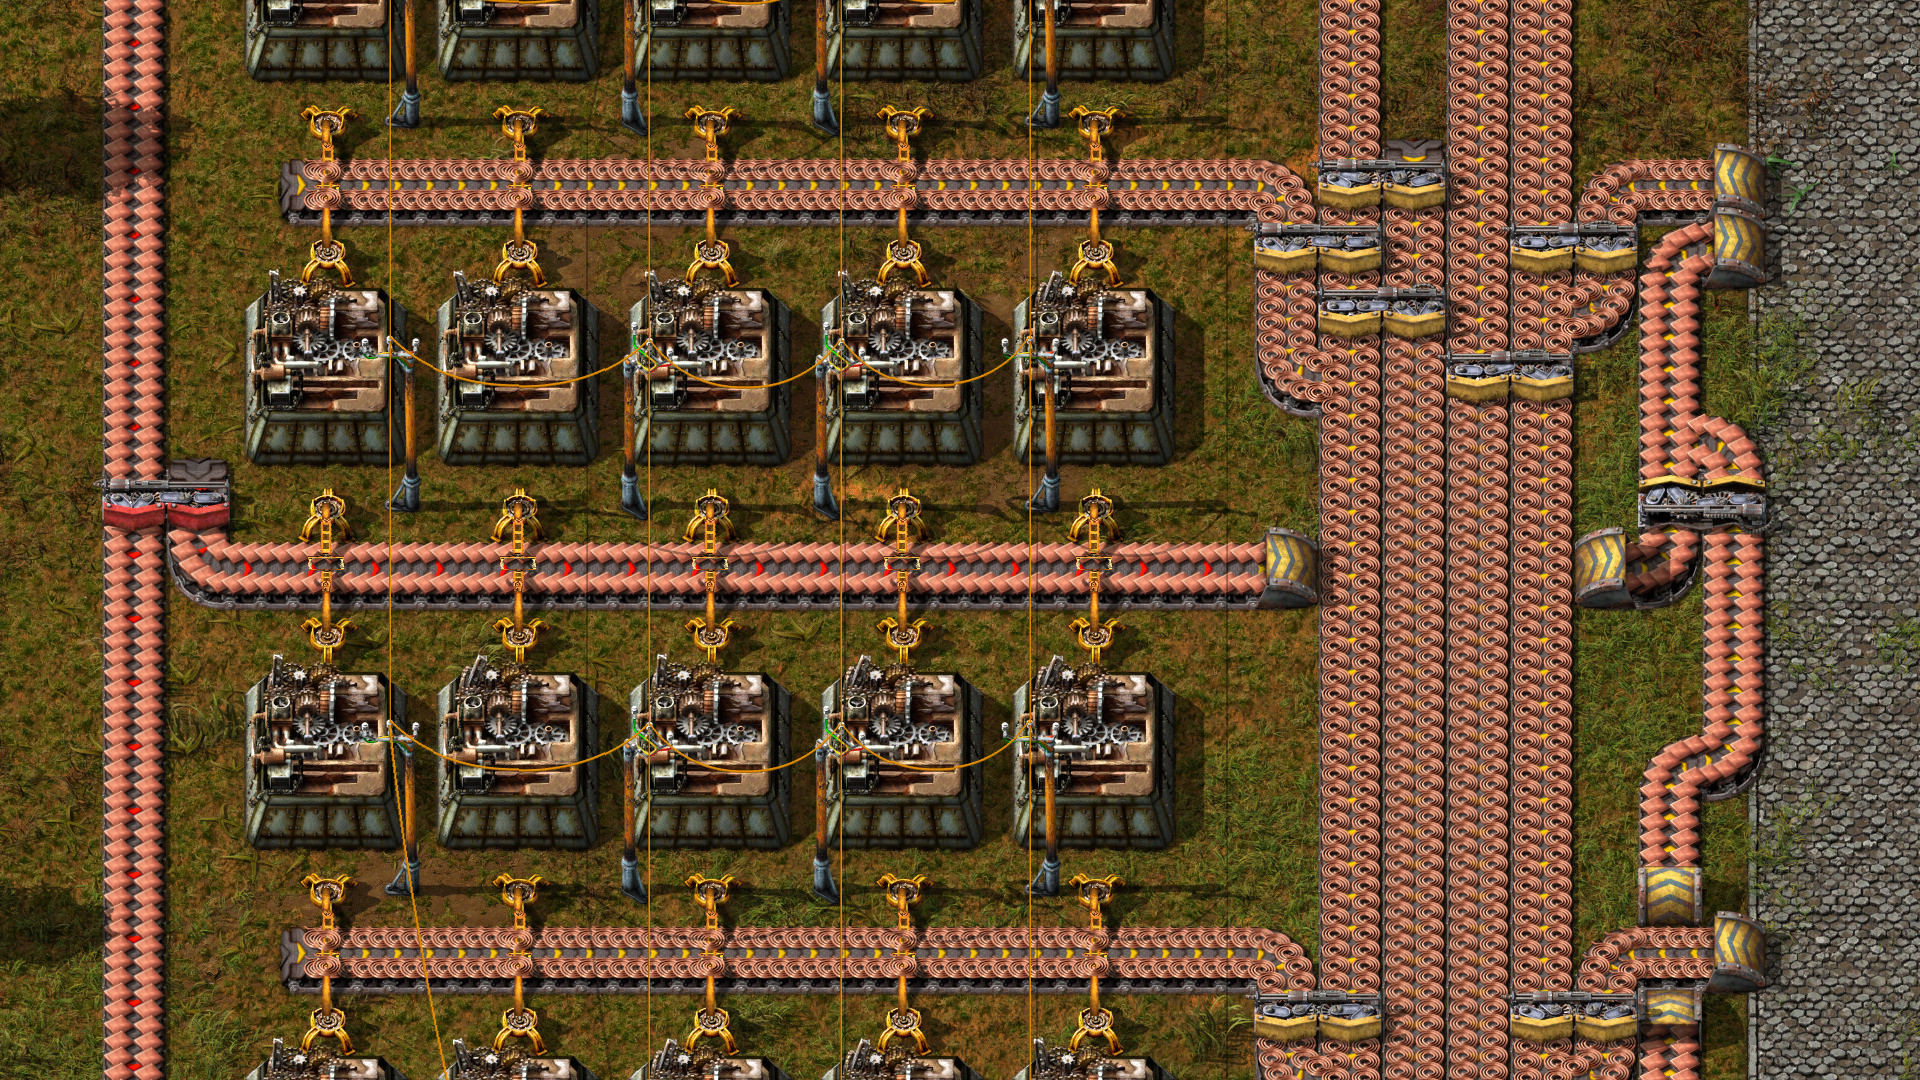 timebuttons .16 factorio download